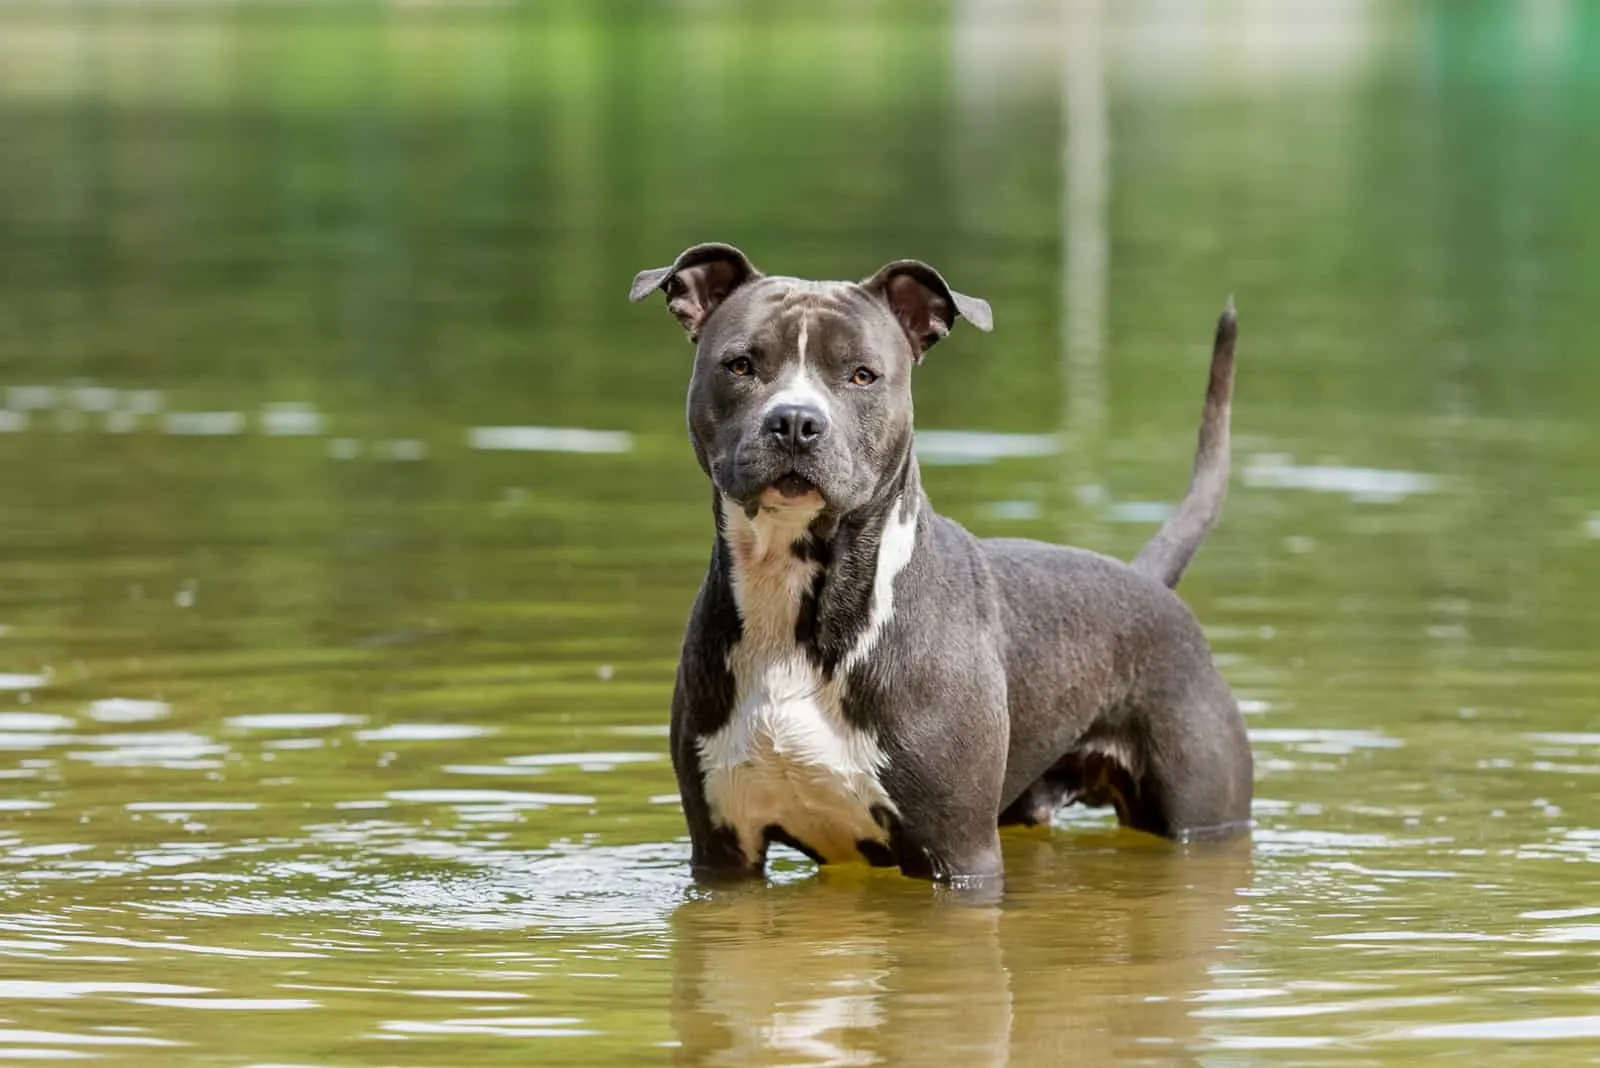 American Pitbull Terriers stand in the water